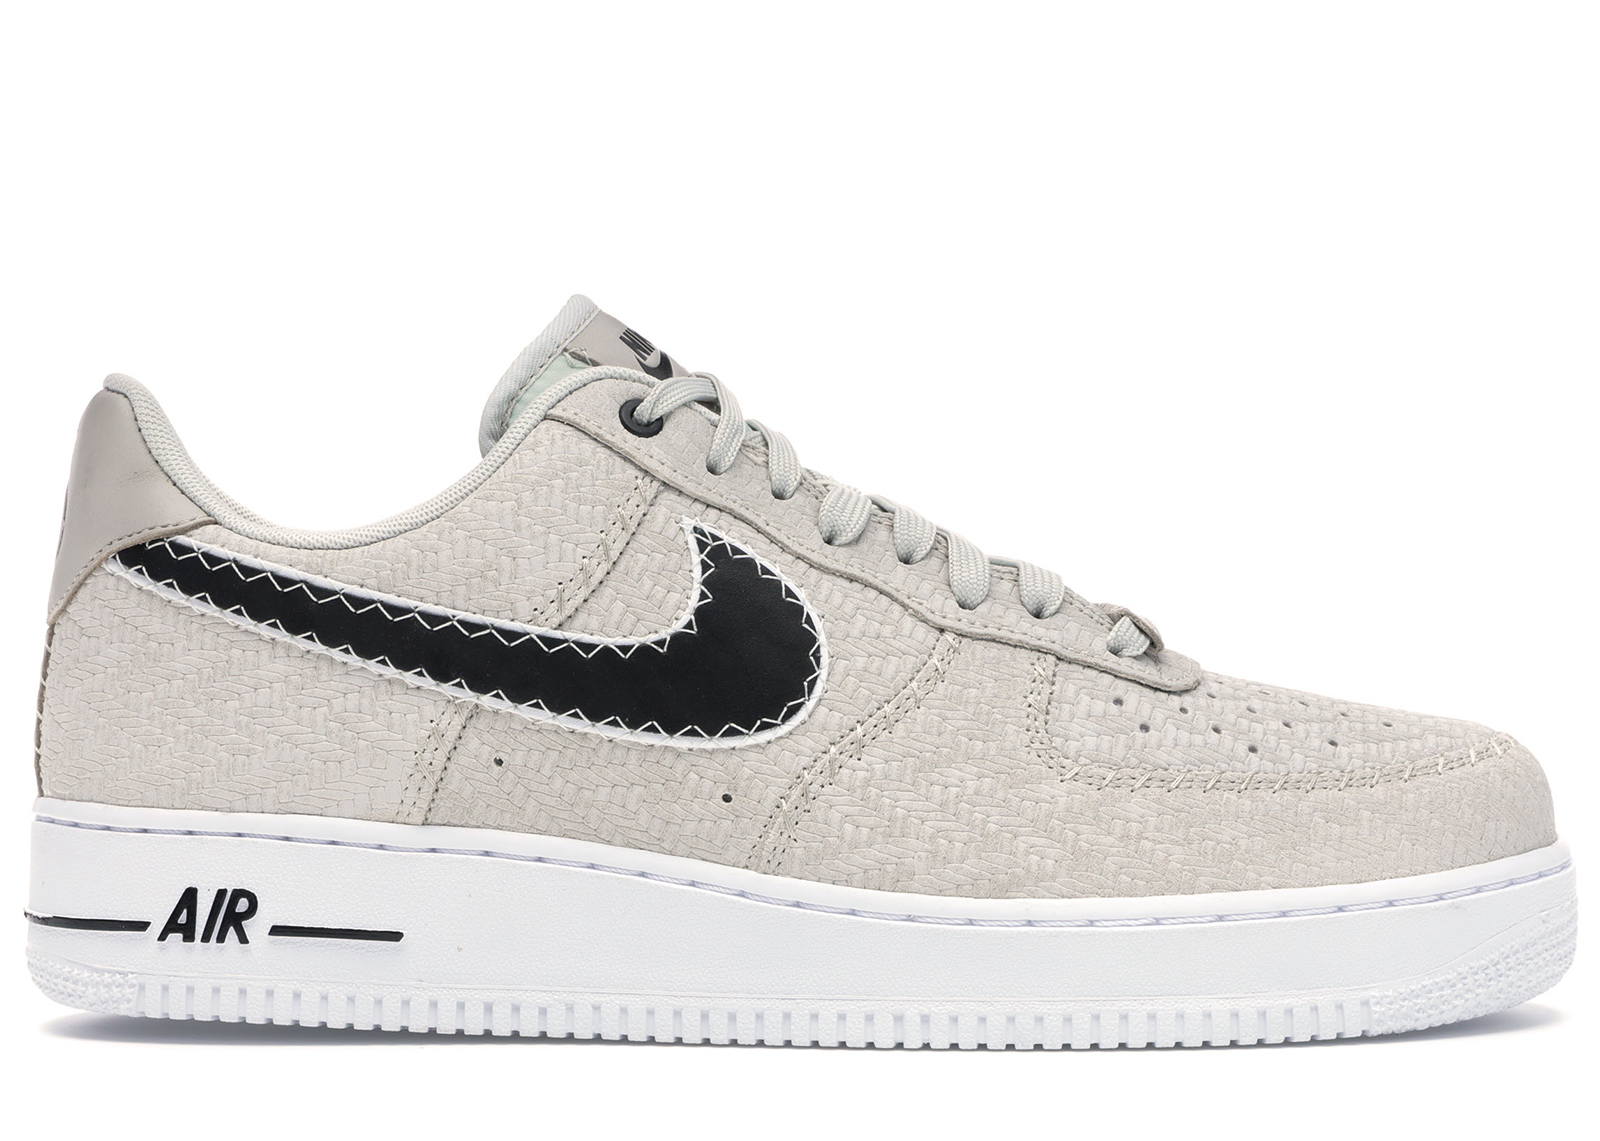 2018 nike air force 1 low in white and black for sale